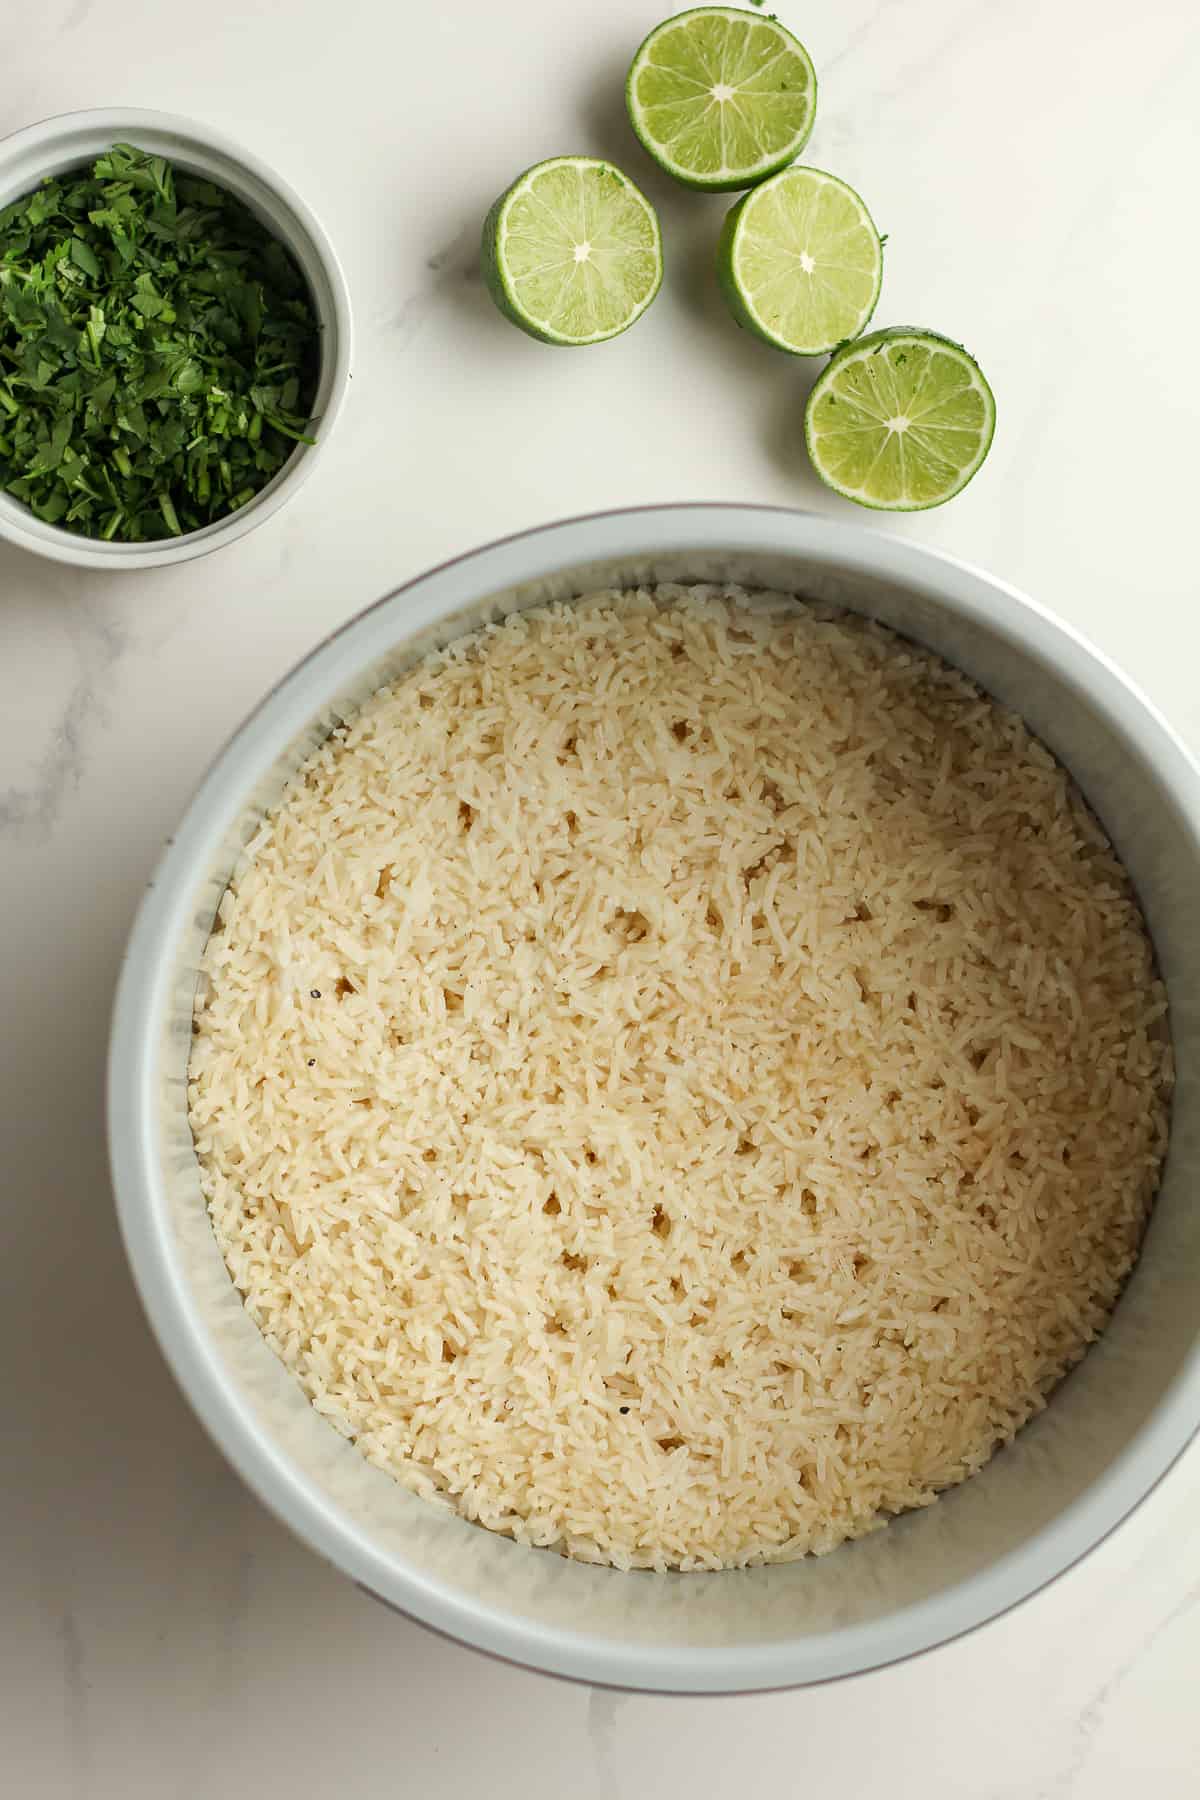 An instant pot of white rice with a bowl of cilantro and halved limes beside the pot.